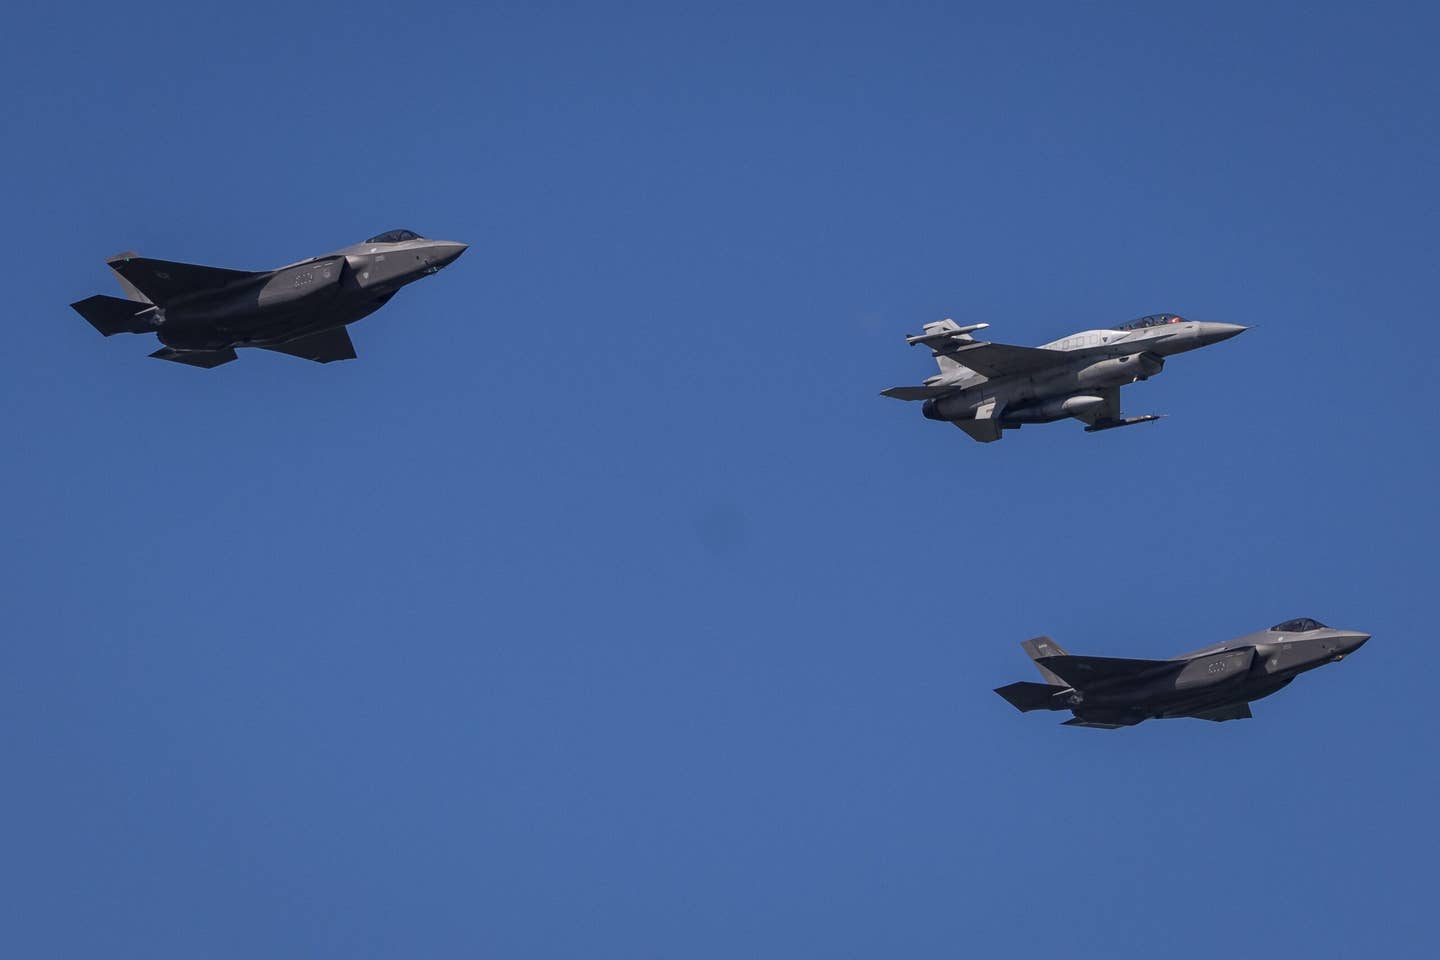 Two U.S. Air Force F-35s and a Polish Air Force F-16 take part in a military parade in Warsaw on Polish Army Day, August 15, 2023, to commemorate the anniversary of the 1920 victory over Soviet Russia at the Battle of Warsaw during the Polish-Soviet War. <em>Photo by WOJTEK RADWANSKI/AFP via Getty Images</em>